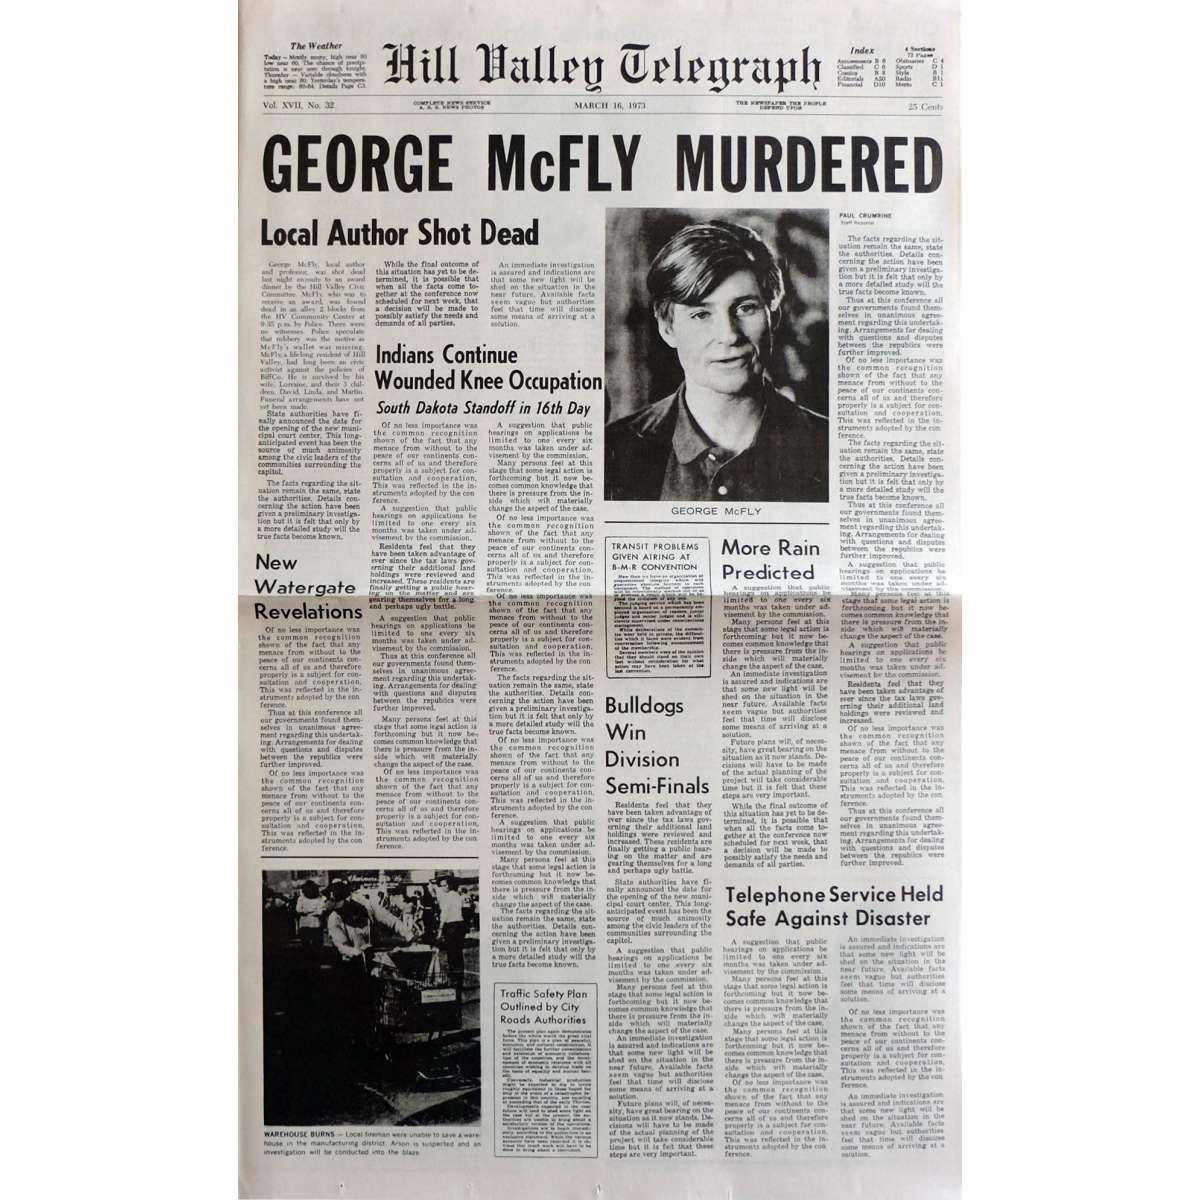 BACK TO THE FUTURE Newspapers Prop Replicas George McFly1200 x 1200